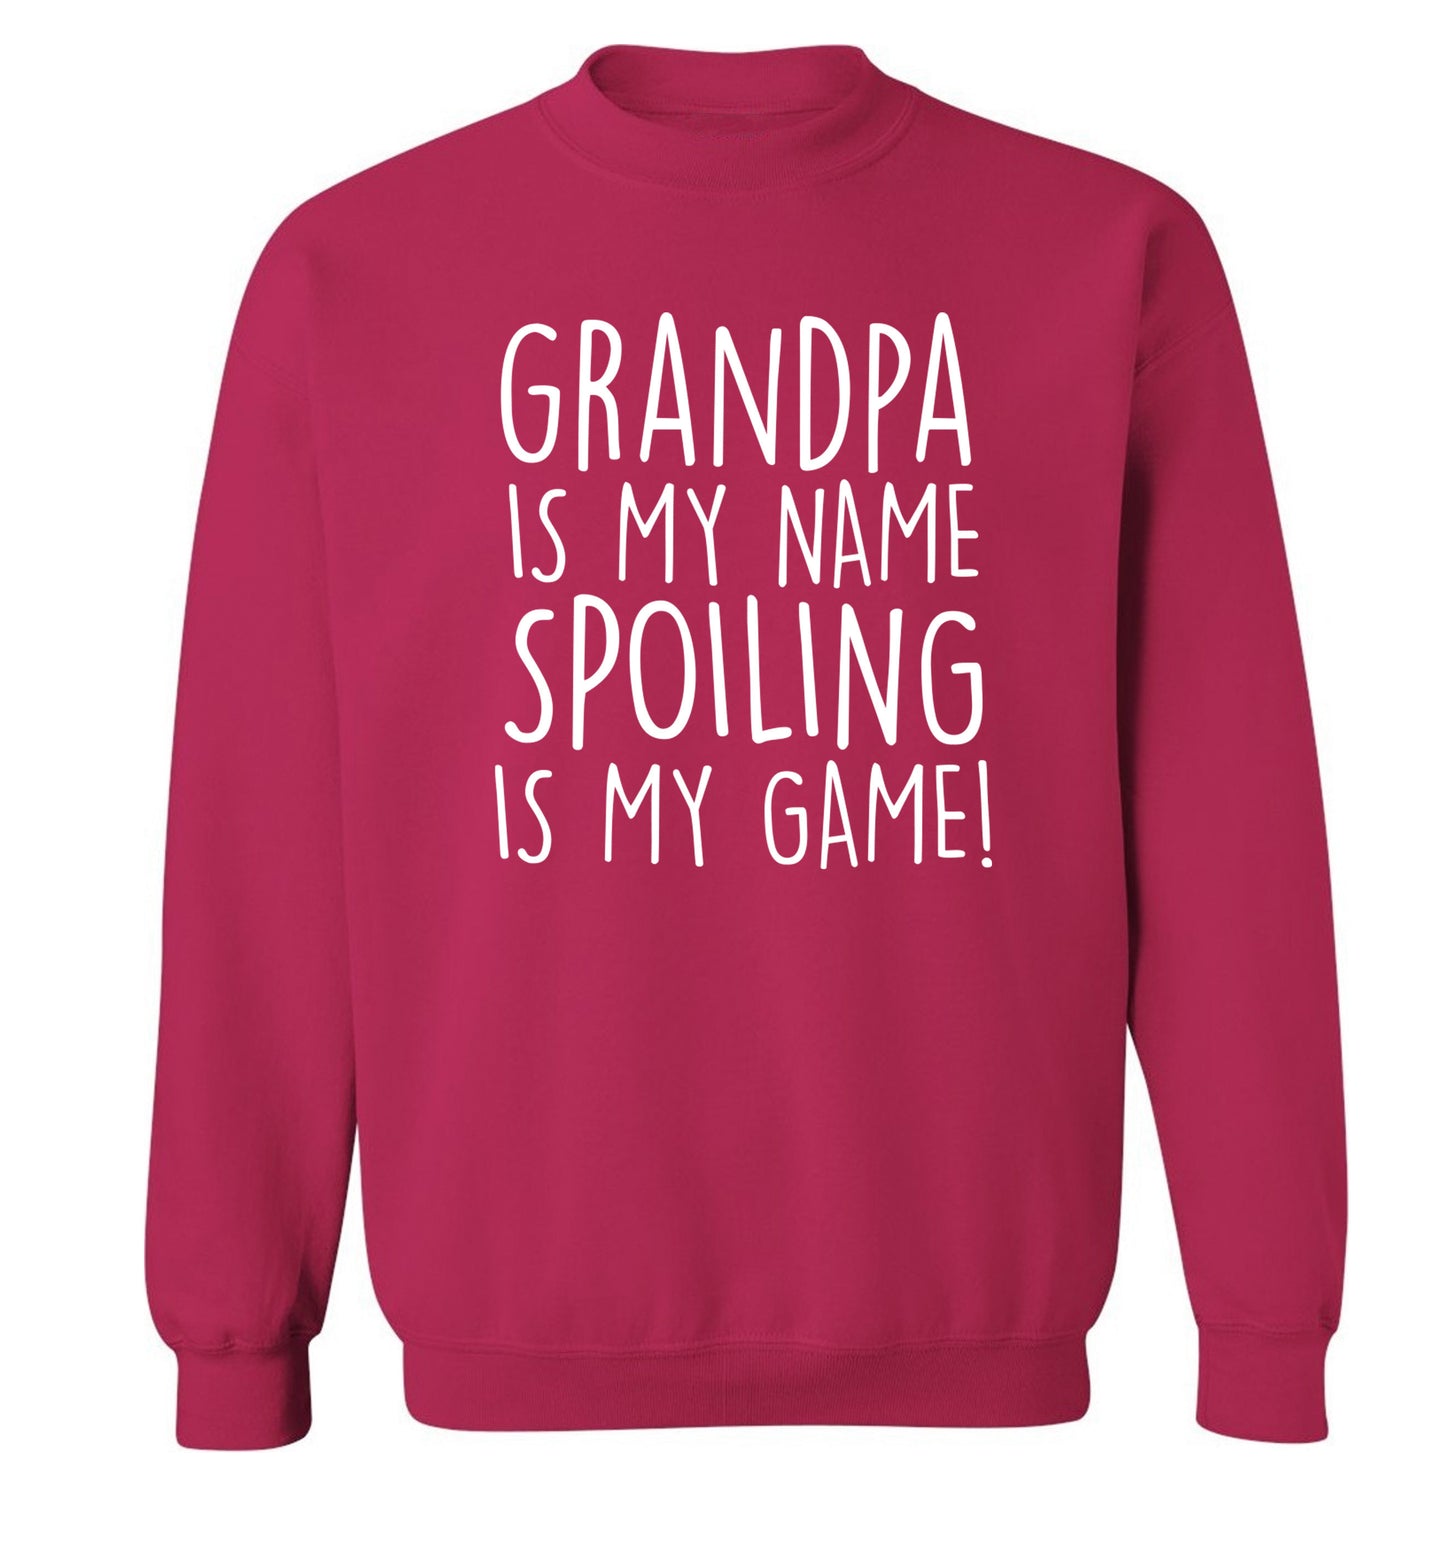 Grandpa is my name, spoiling is my game Adult's unisex pink Sweater 2XL